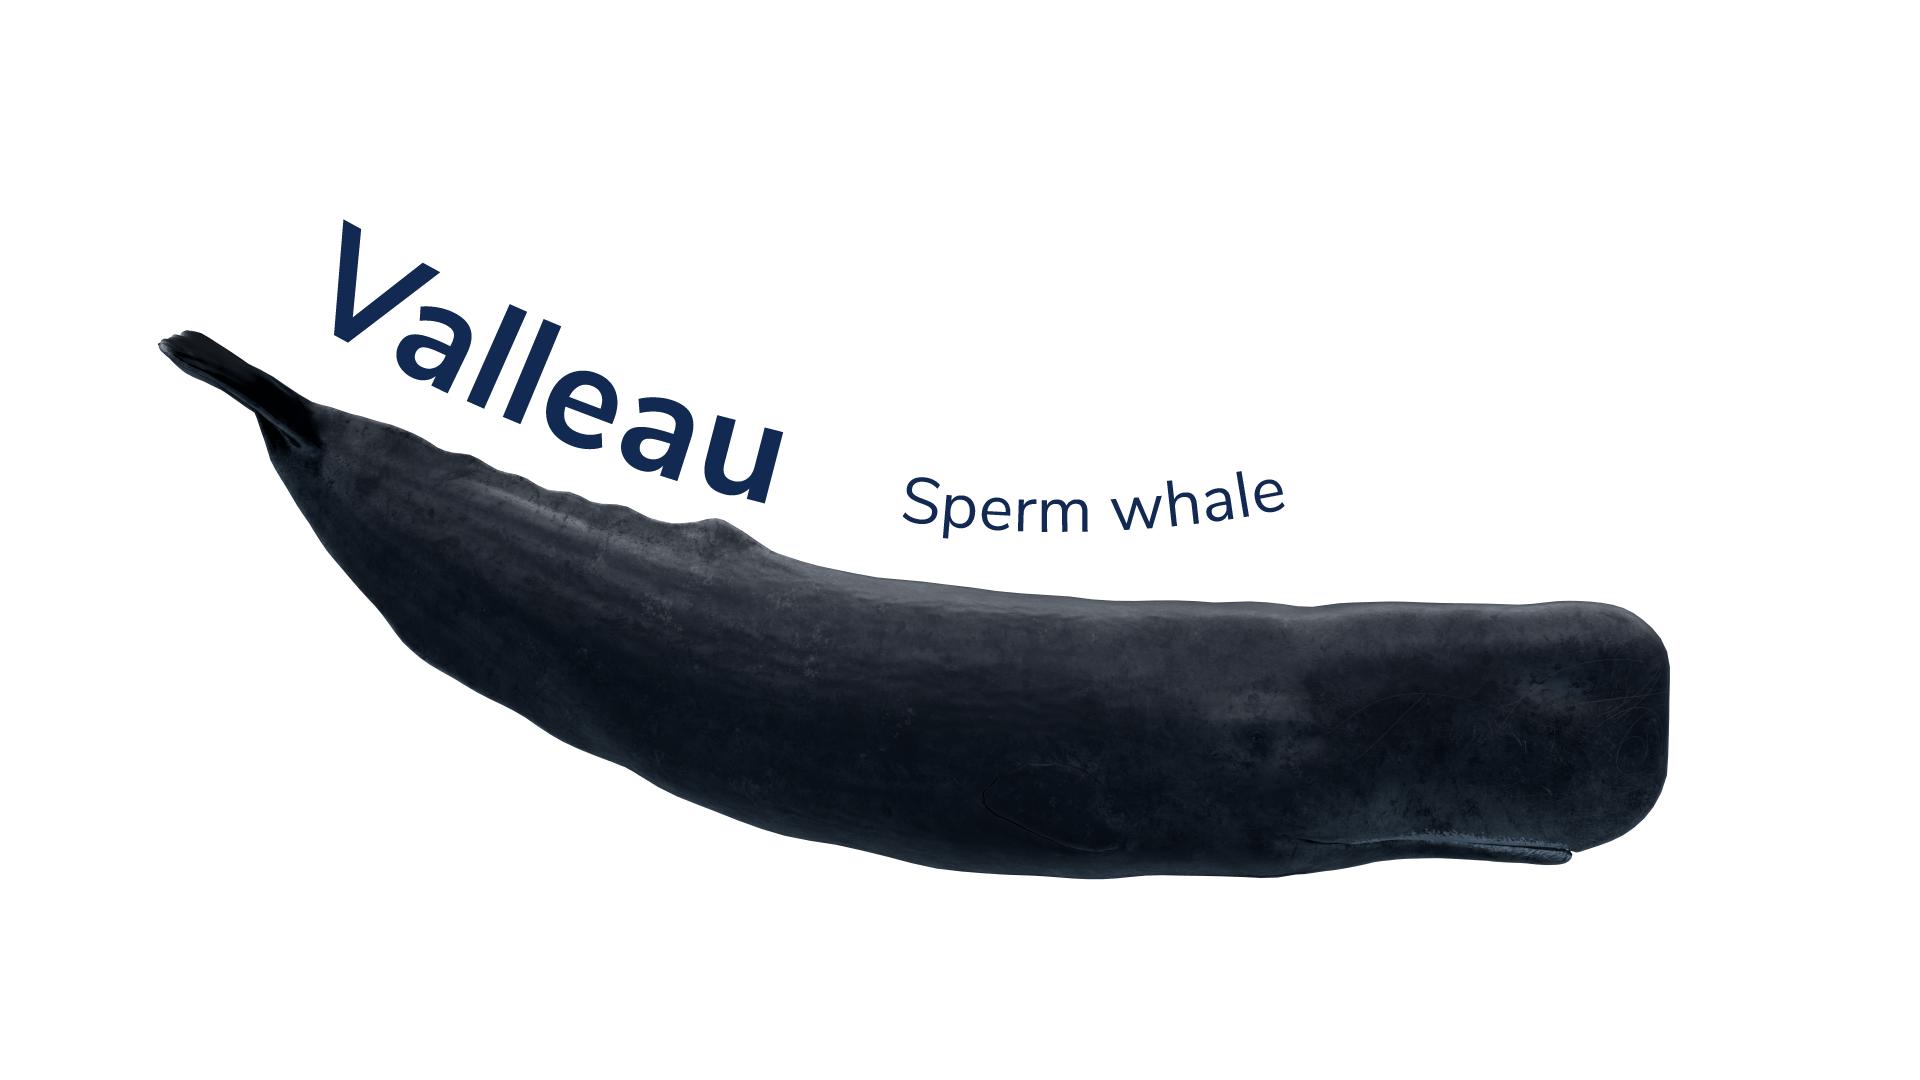 The sperm whale Valleau